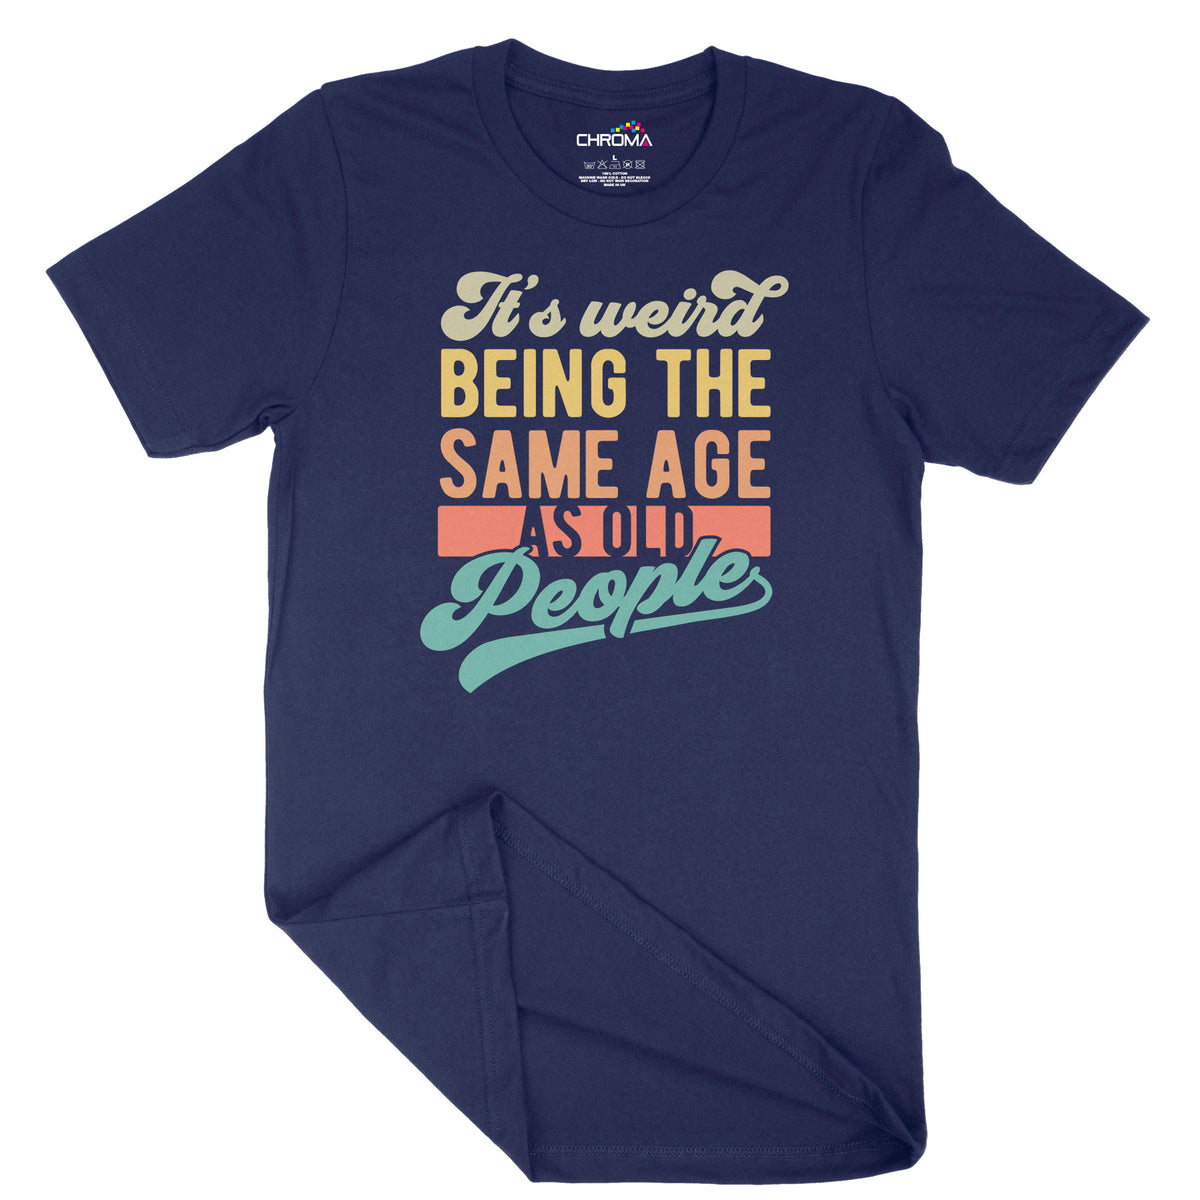 It's Weird Being The Same Age As Old People | Unisex Adult T-Shirt | Q Chroma Clothing